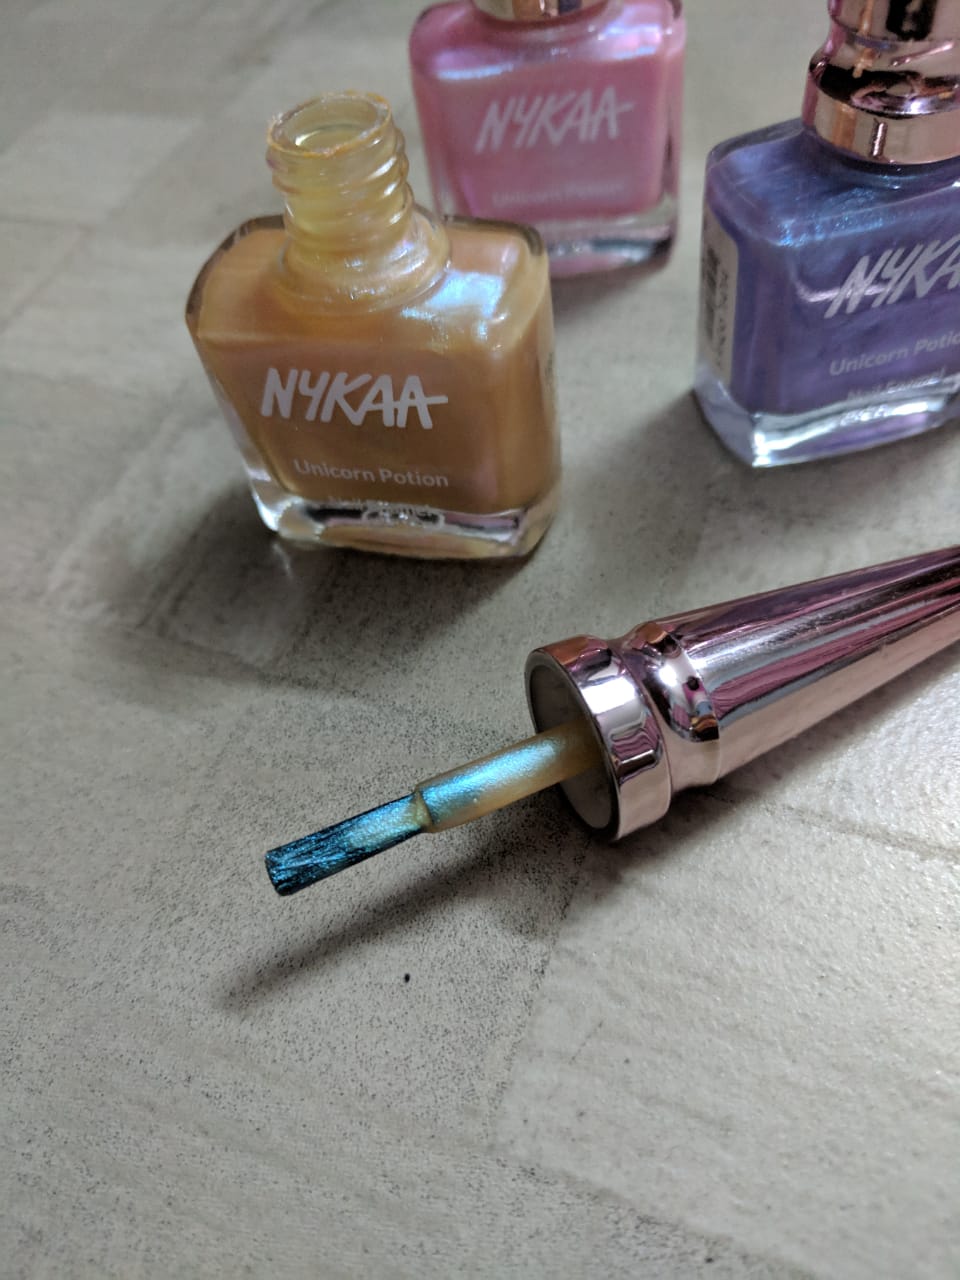 Nykaa Unicorn Potion nail enamel in the shade Frosted Fairy ✨ The shade is  very pretty. Unique! It's a blue-lavender duochrome color w... | Instagram